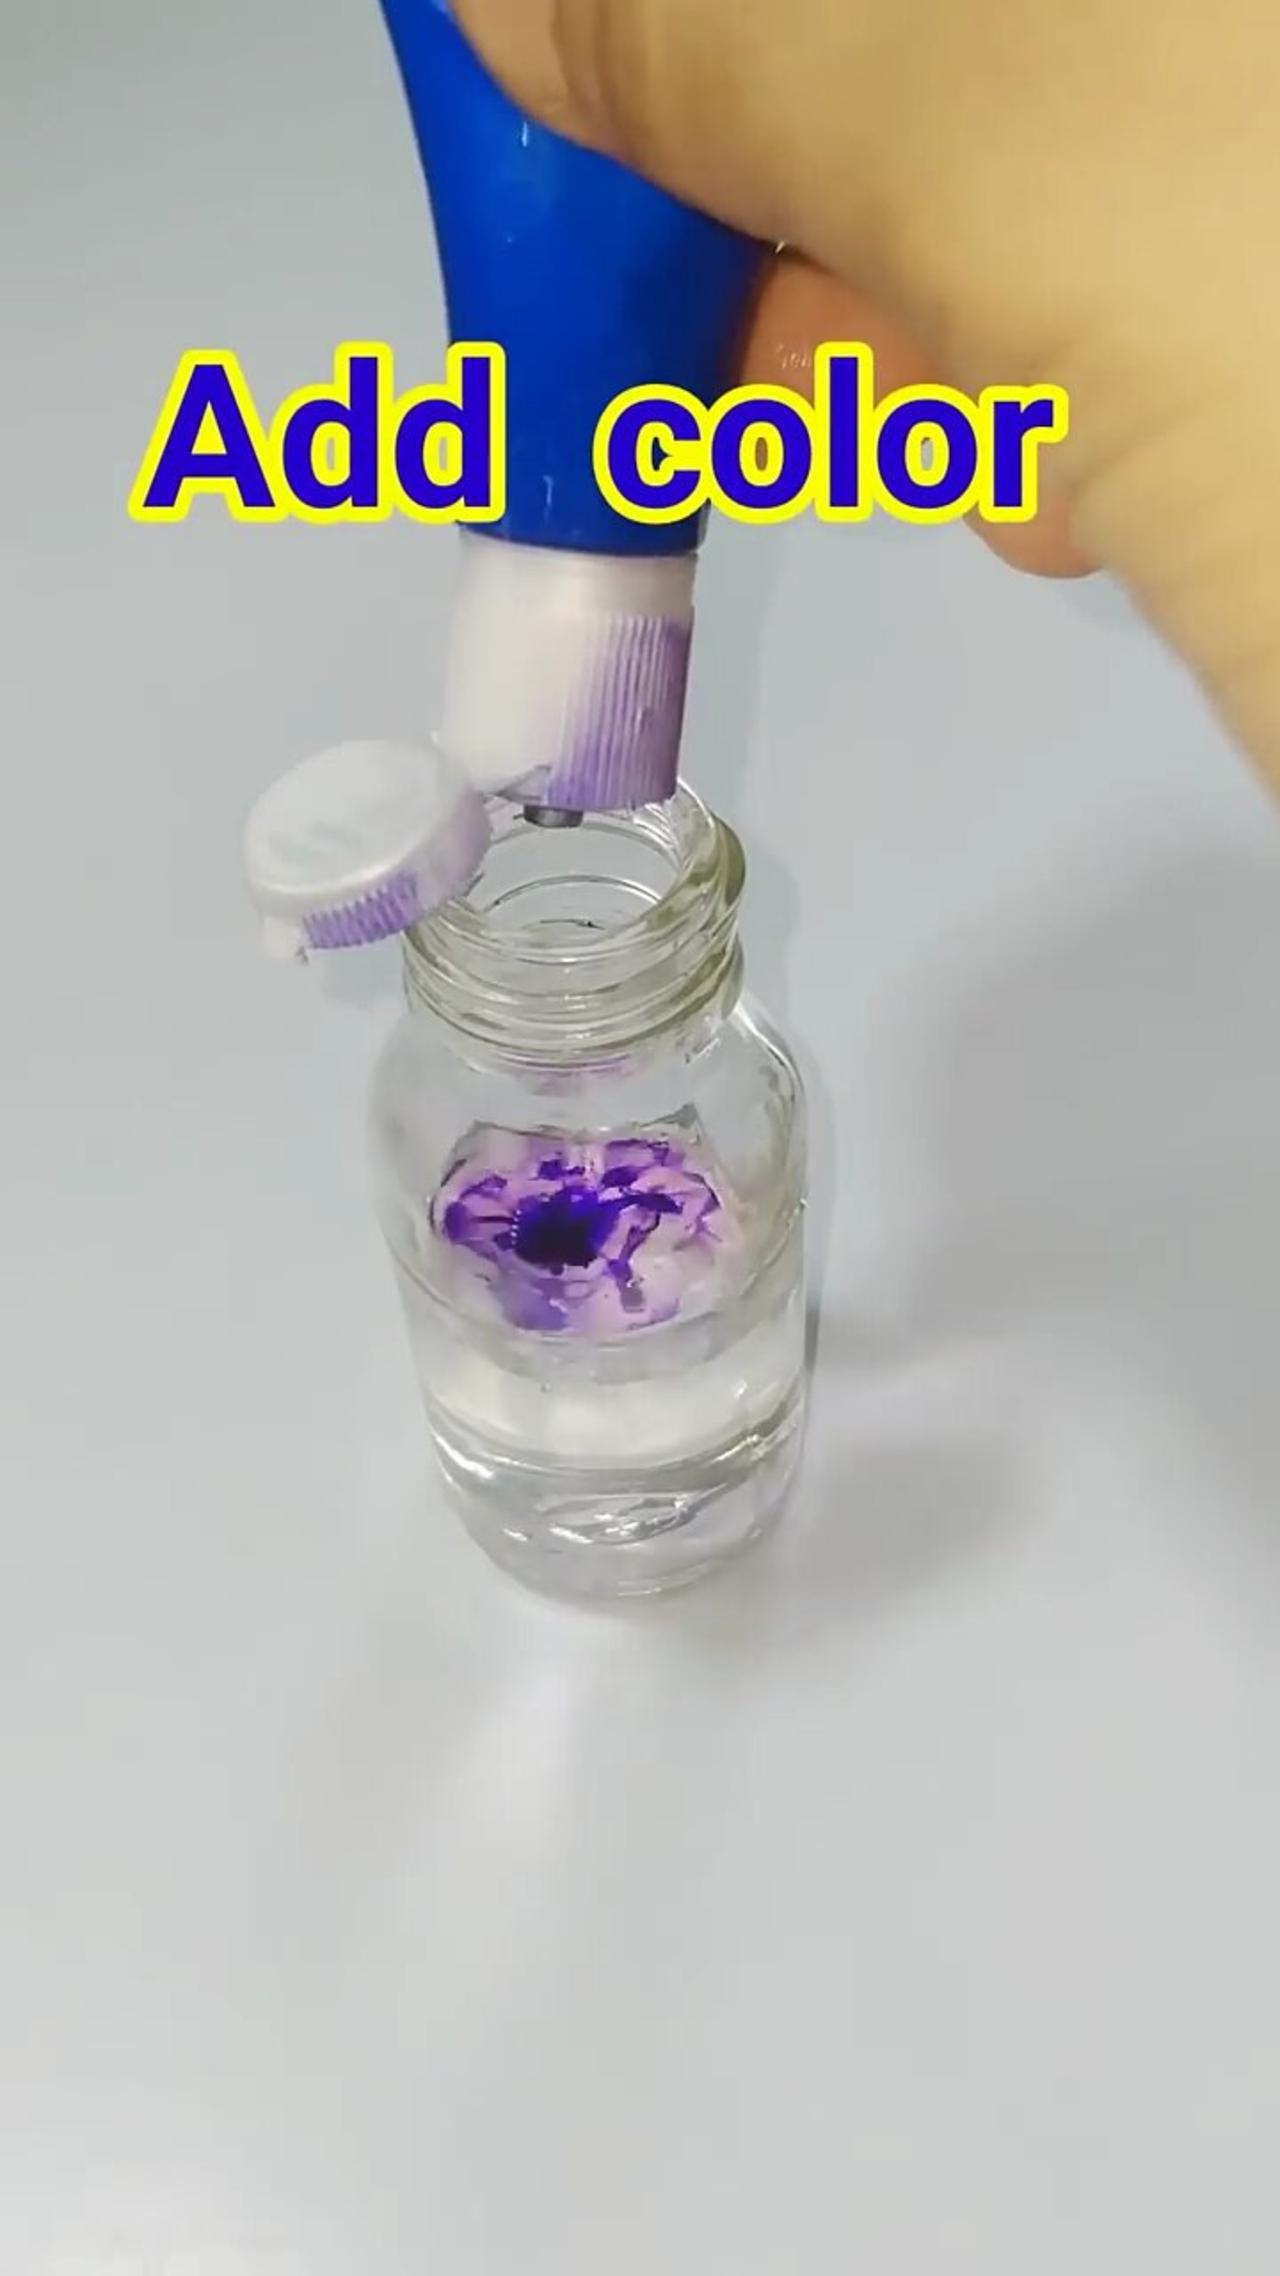 New science experiment 🧪magic trick do at home very easily #science